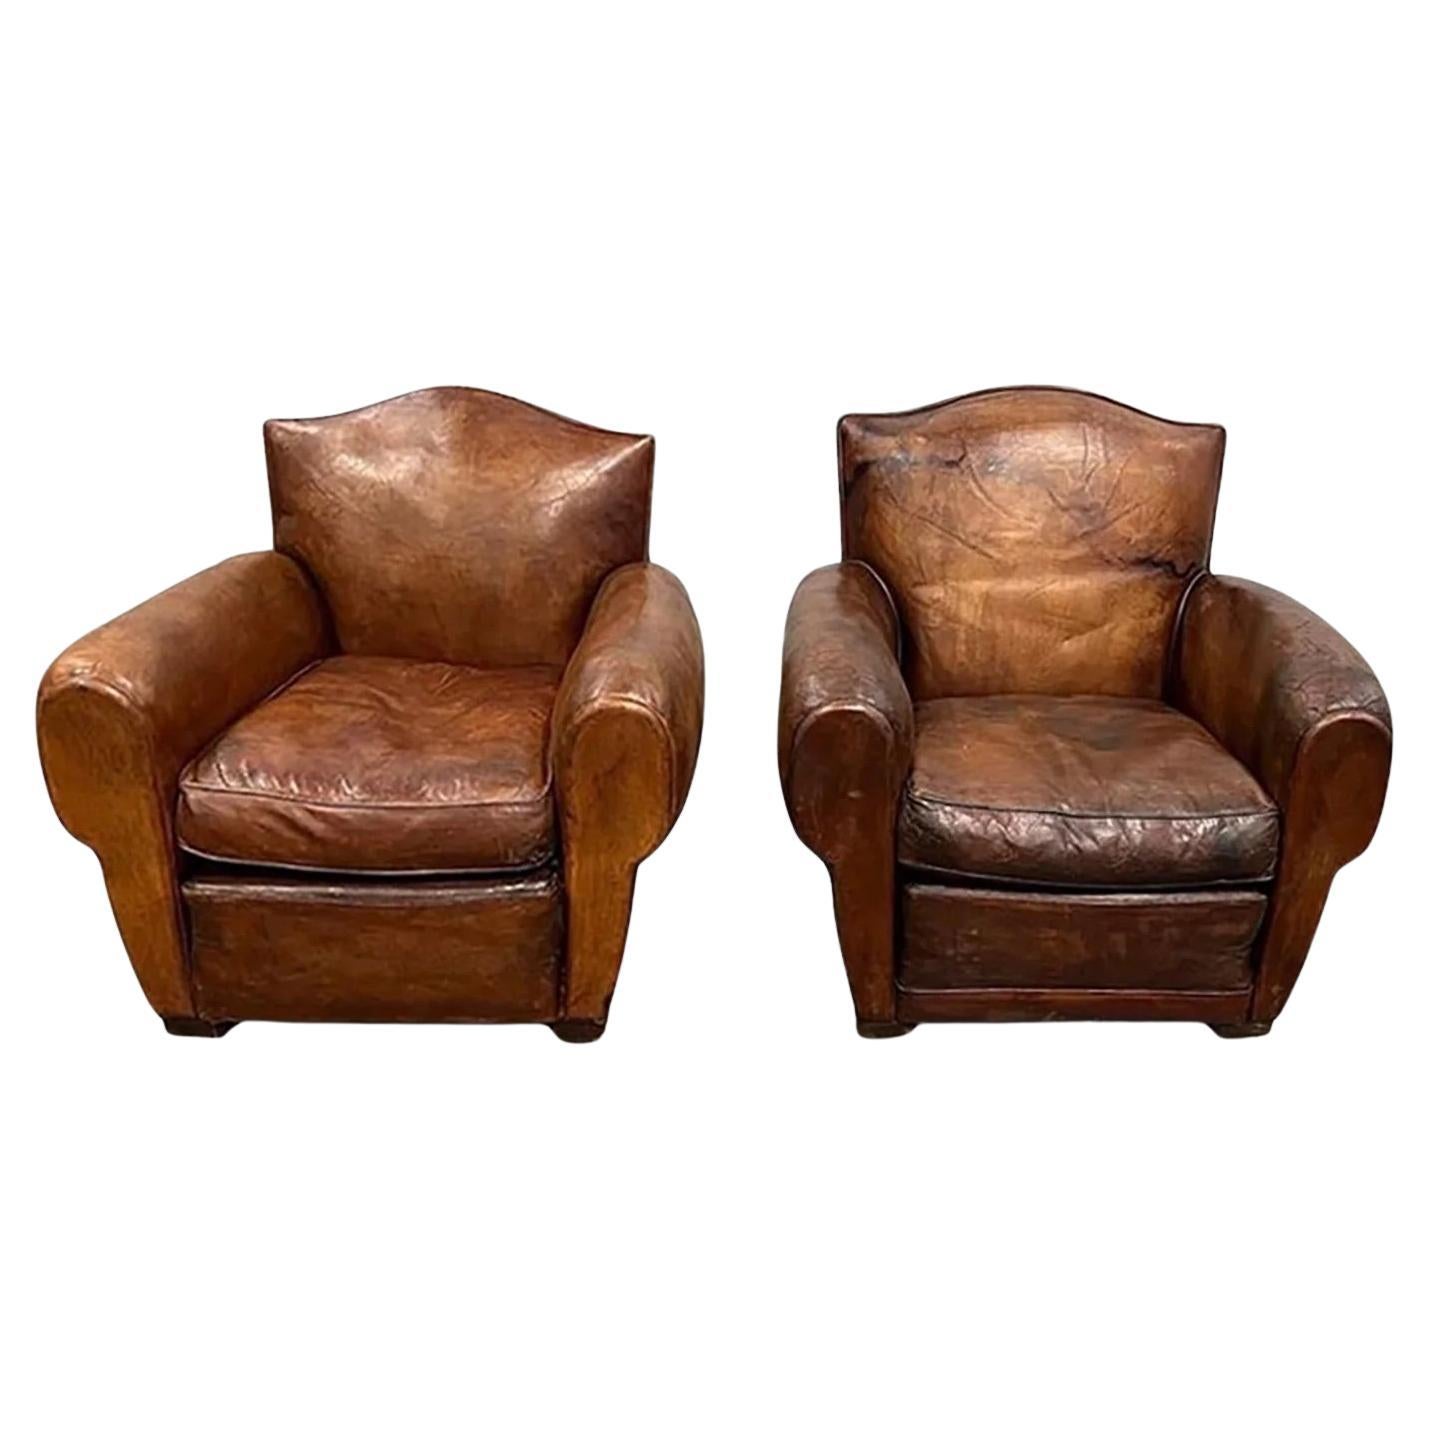 1930's French Leather Club Chairs Pair For Sale